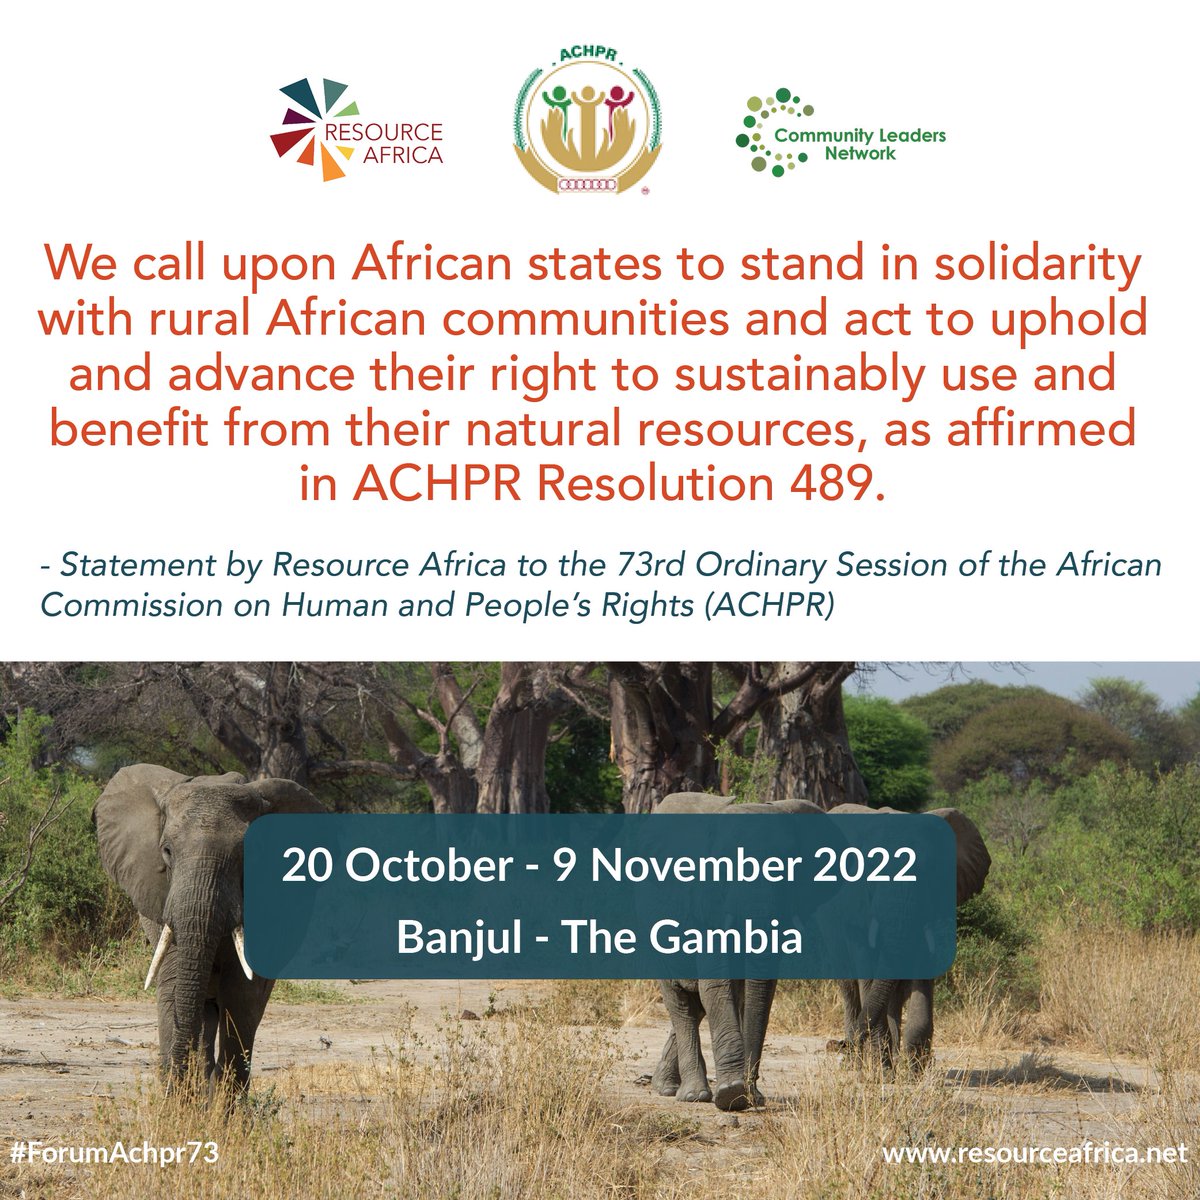 In our statement with @LeadersSouthern at the 73rd Ordinary Session of the @achpr_cadhp, we reflect on Resolution 489 of the AHCPR and the Kigali Call to Action from @APA_Congress to make this request of African states: bit.ly/3eLV16E